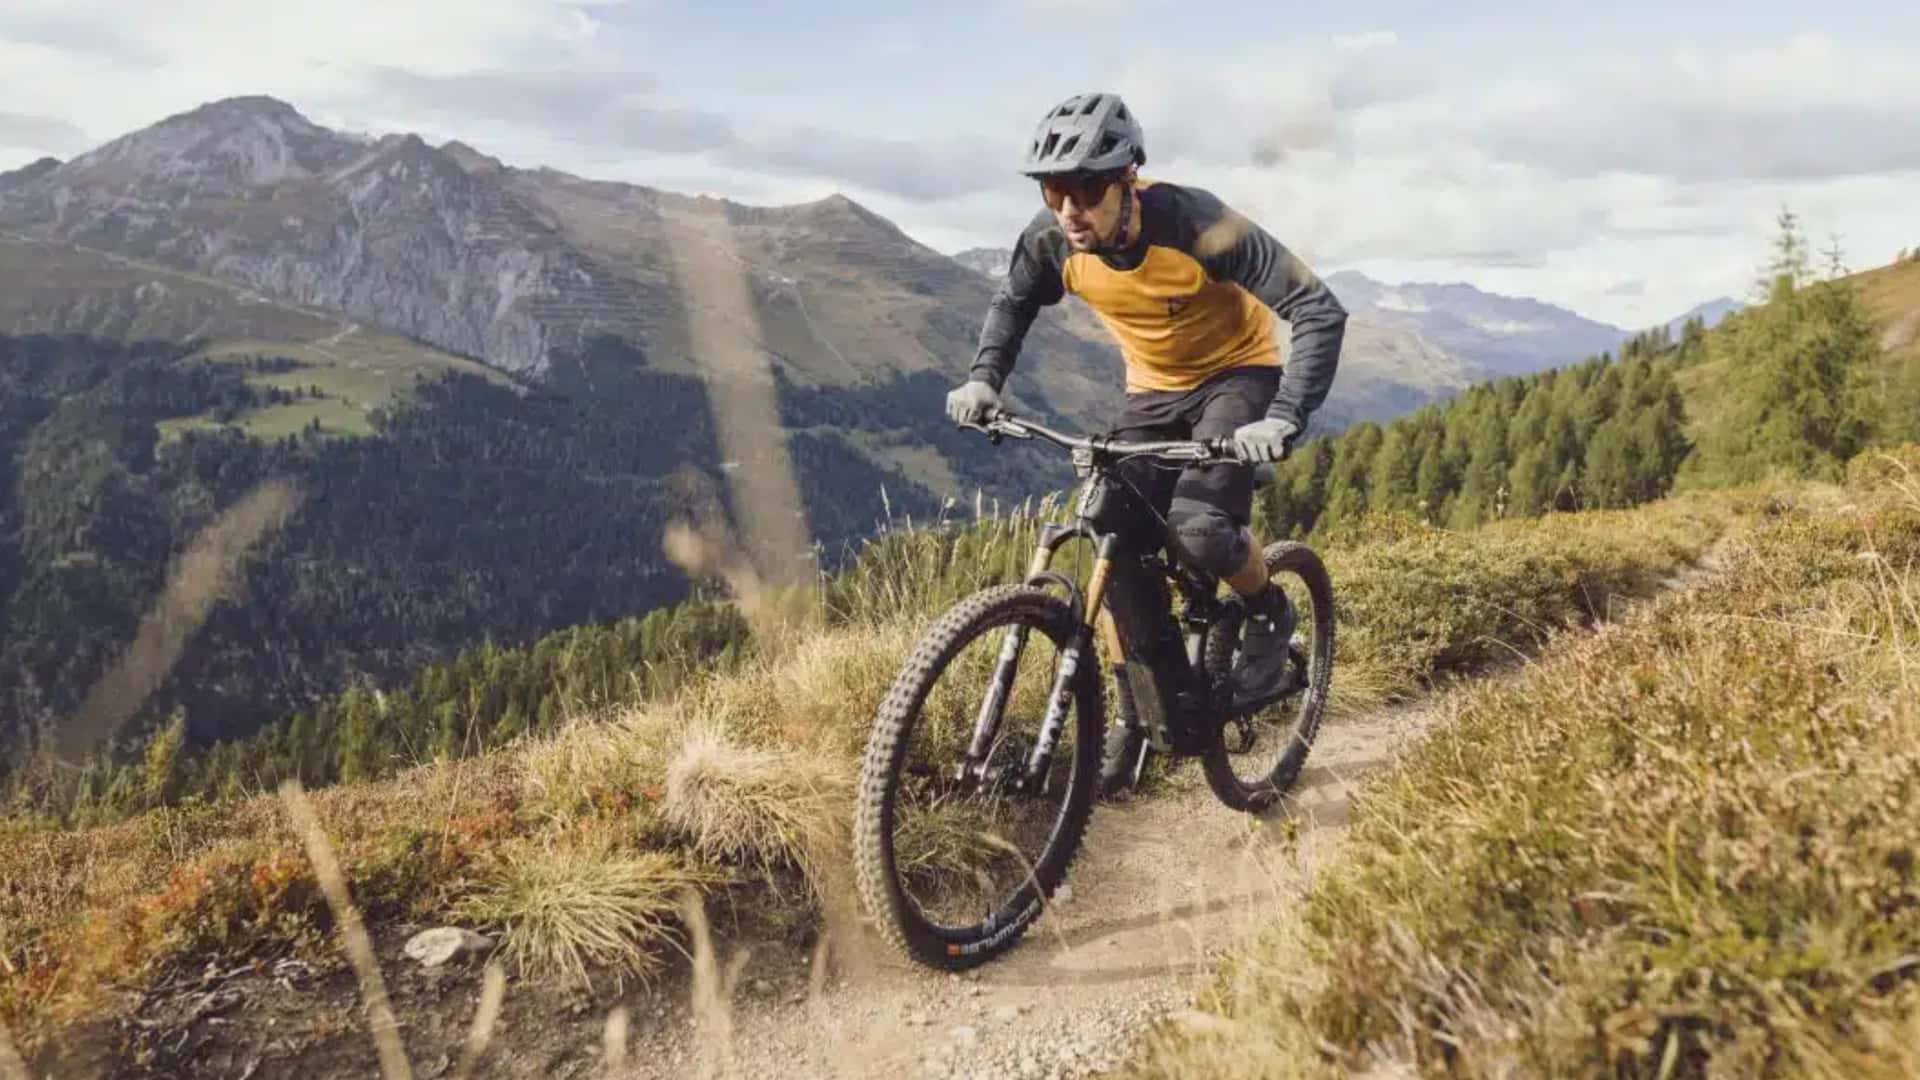 centurion’s newest e-mtb is a lightweight trail ripper loaded with tech